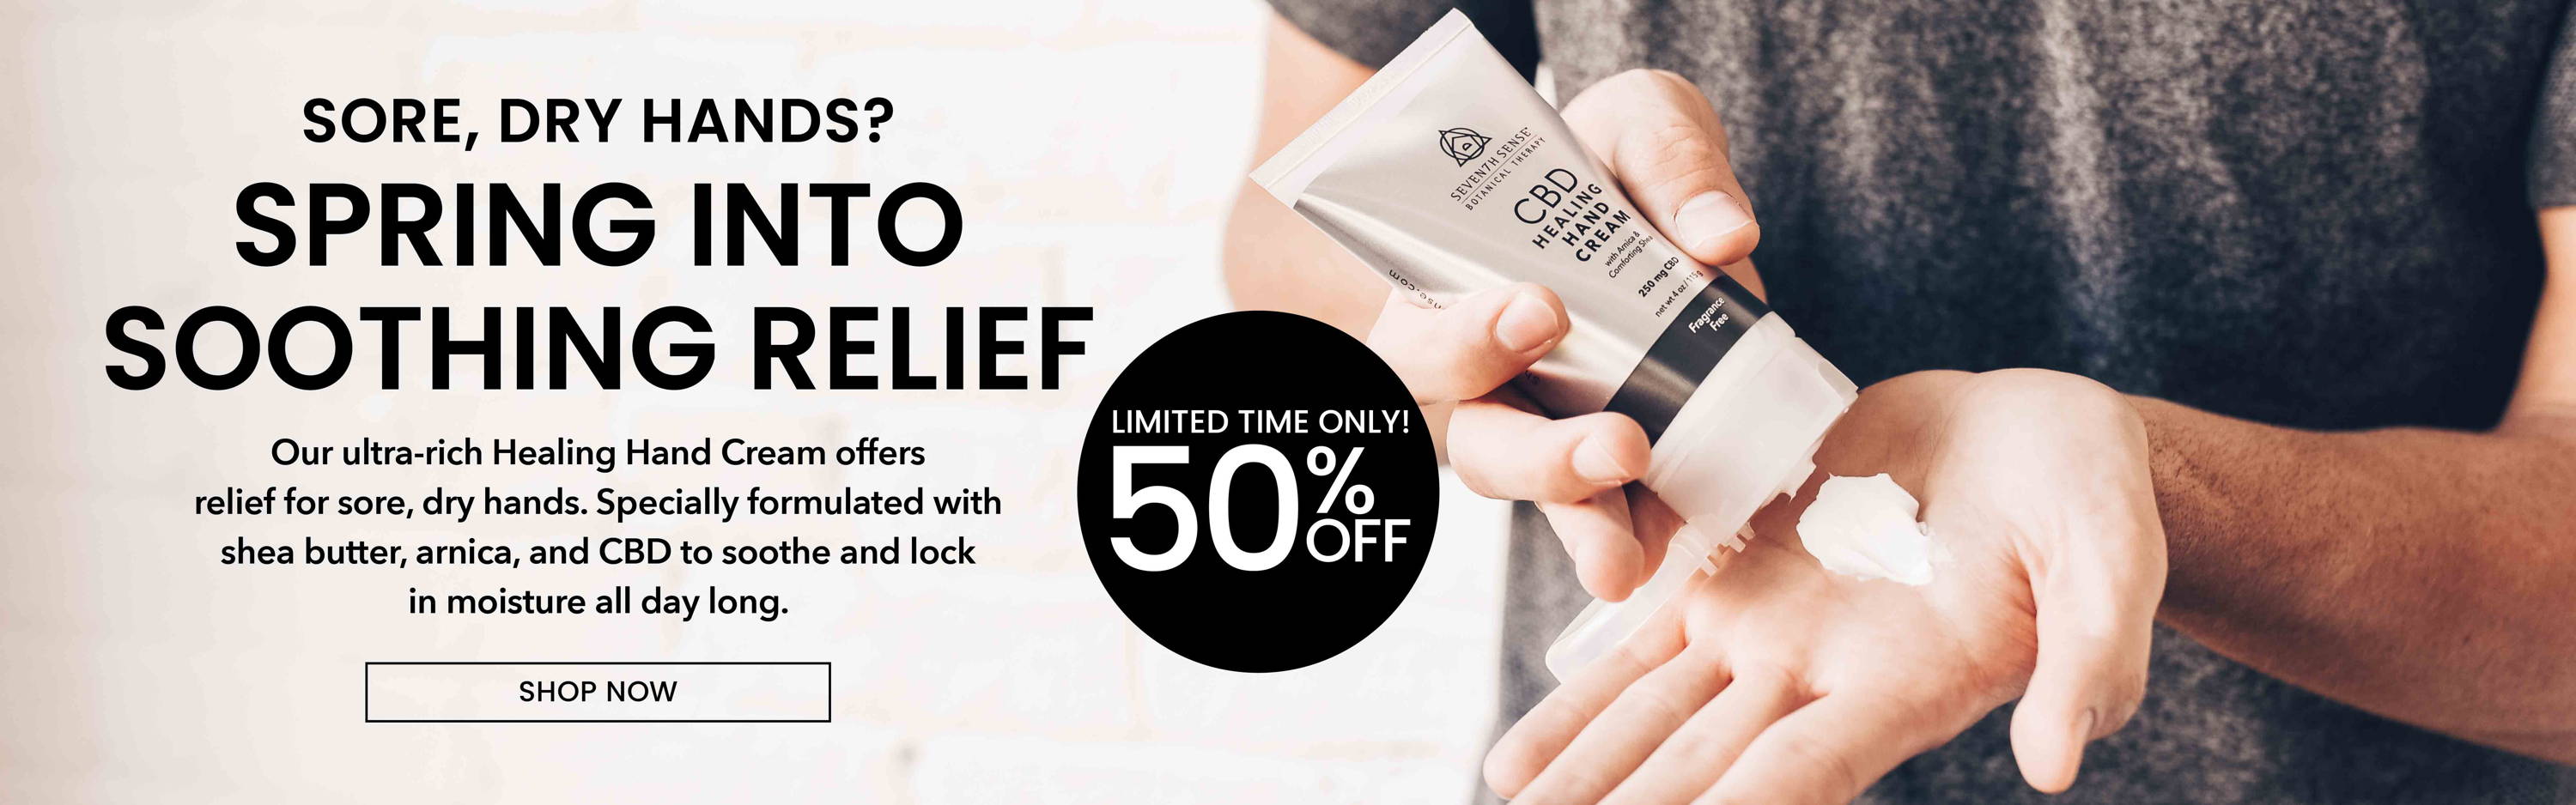 Limited Time Only! 50% Off Healing Hand Creams. While supplies last.